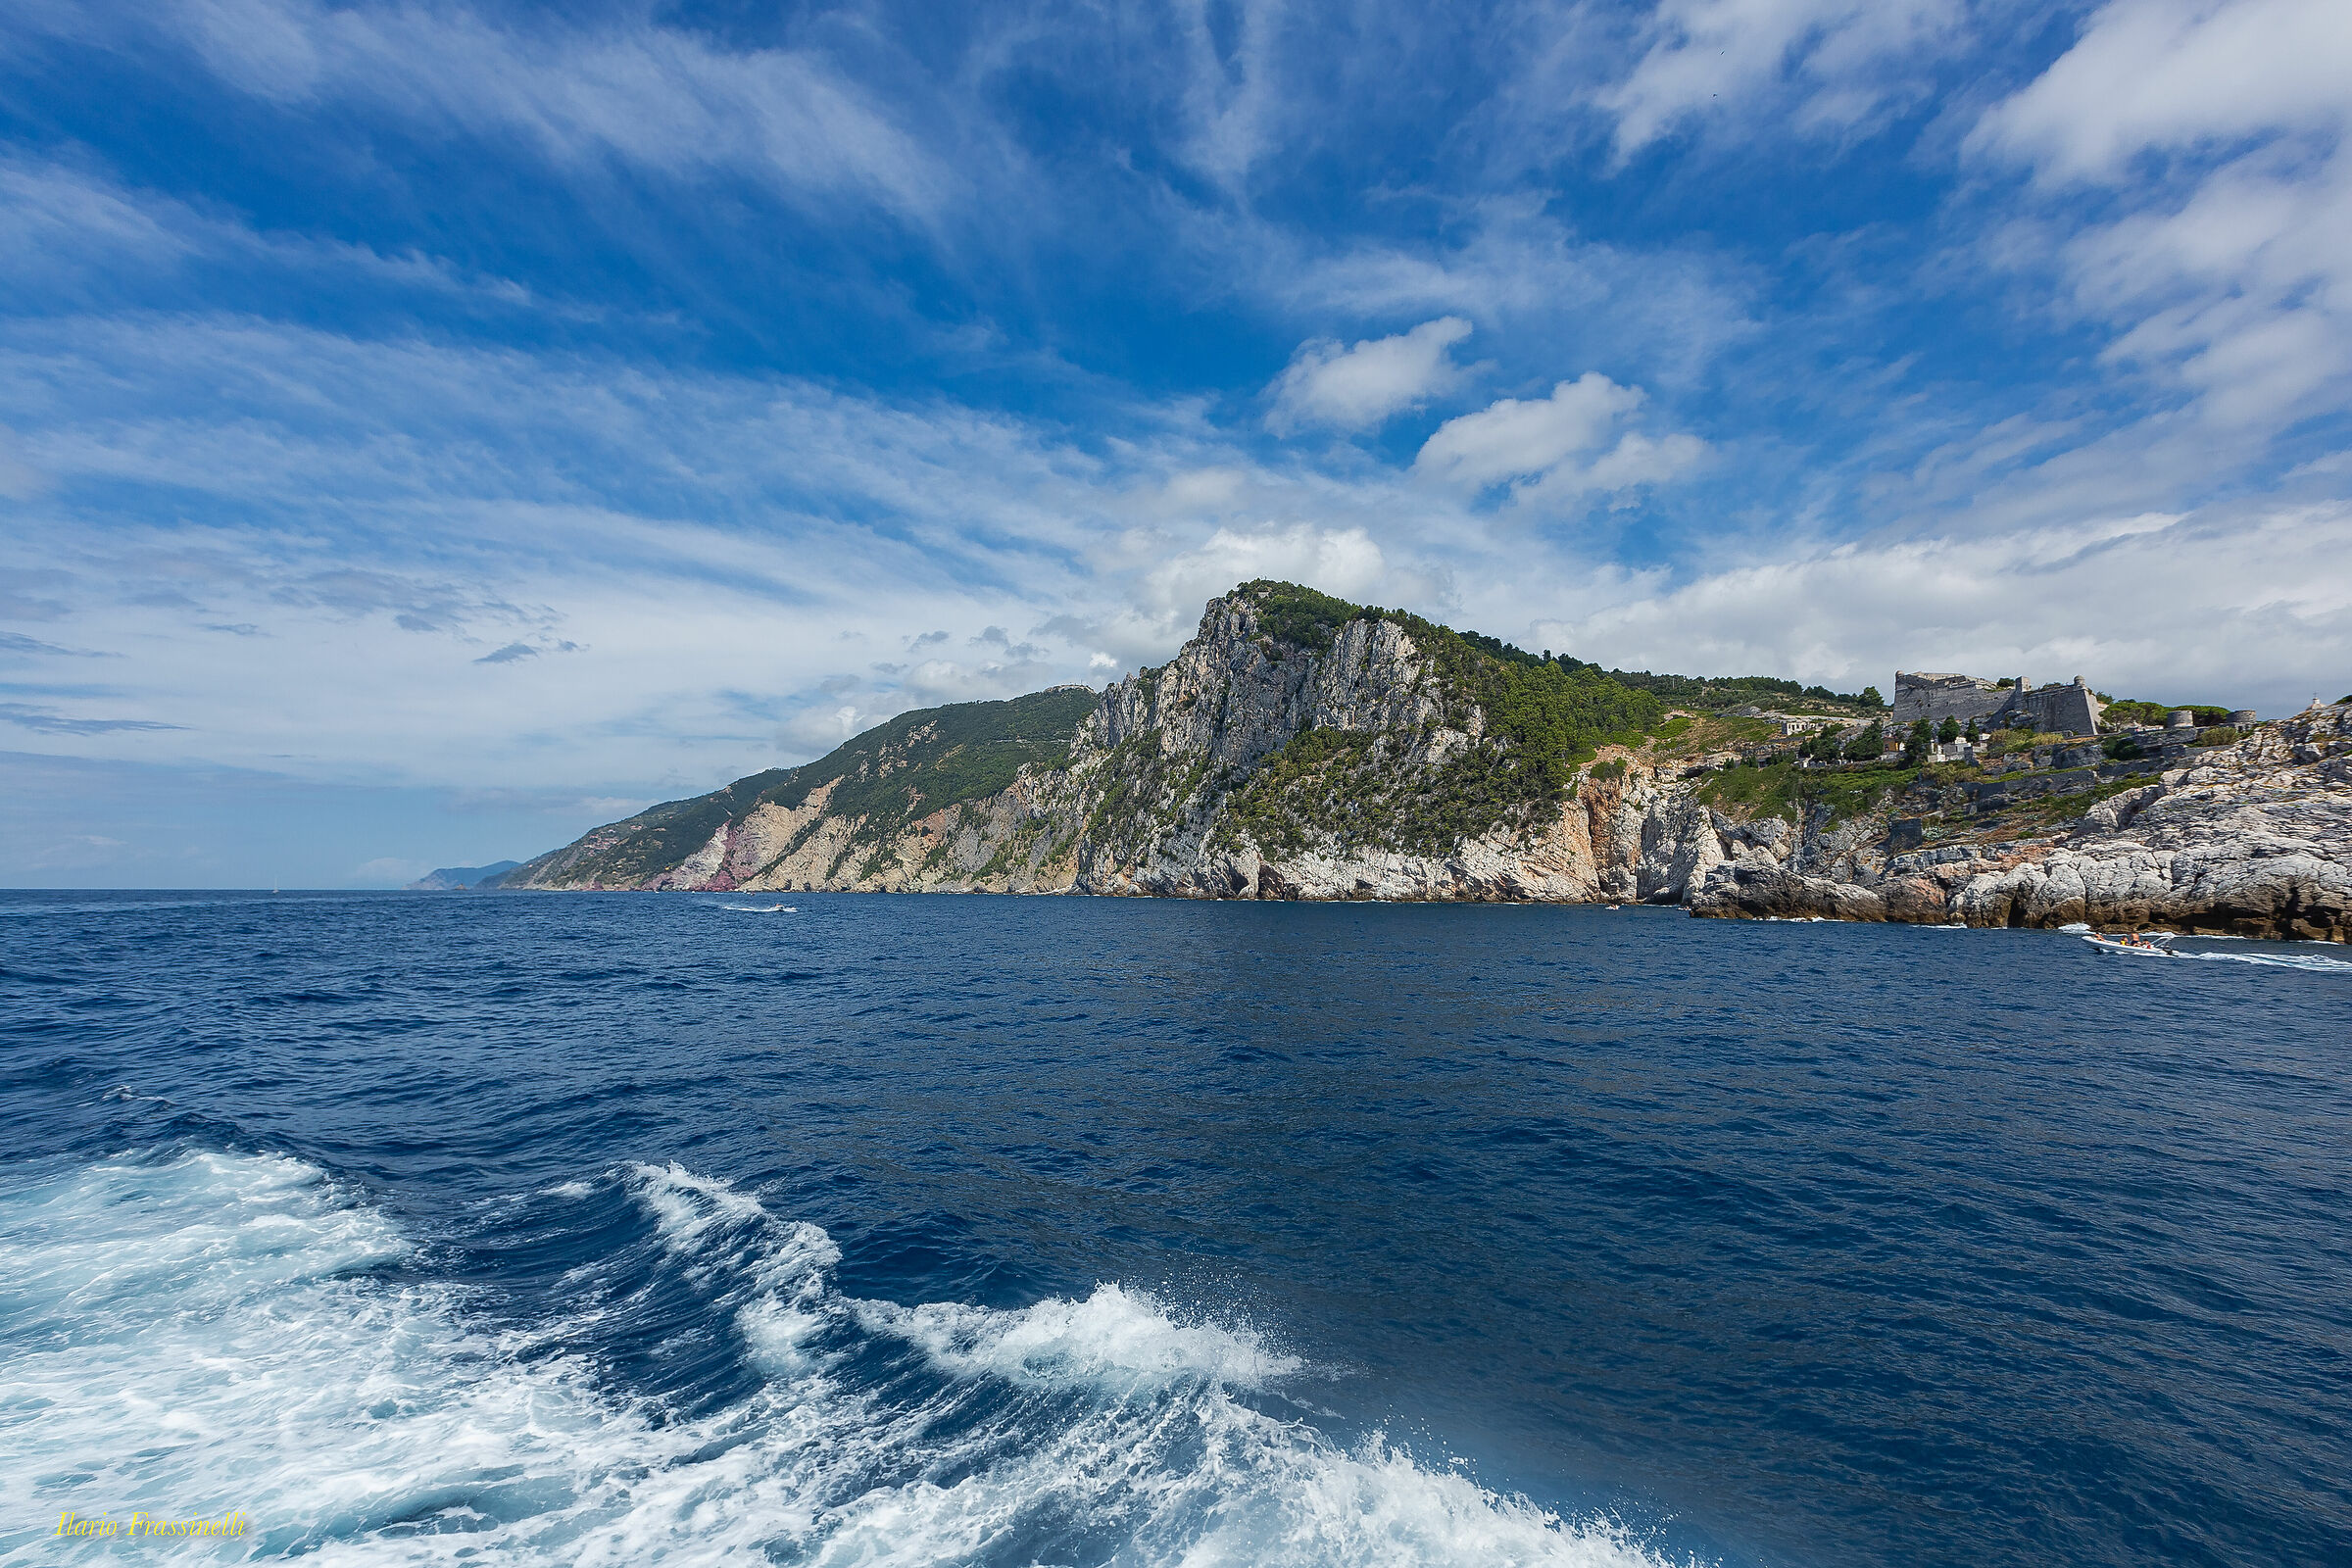 Cinque Terre Park seen from the sea...